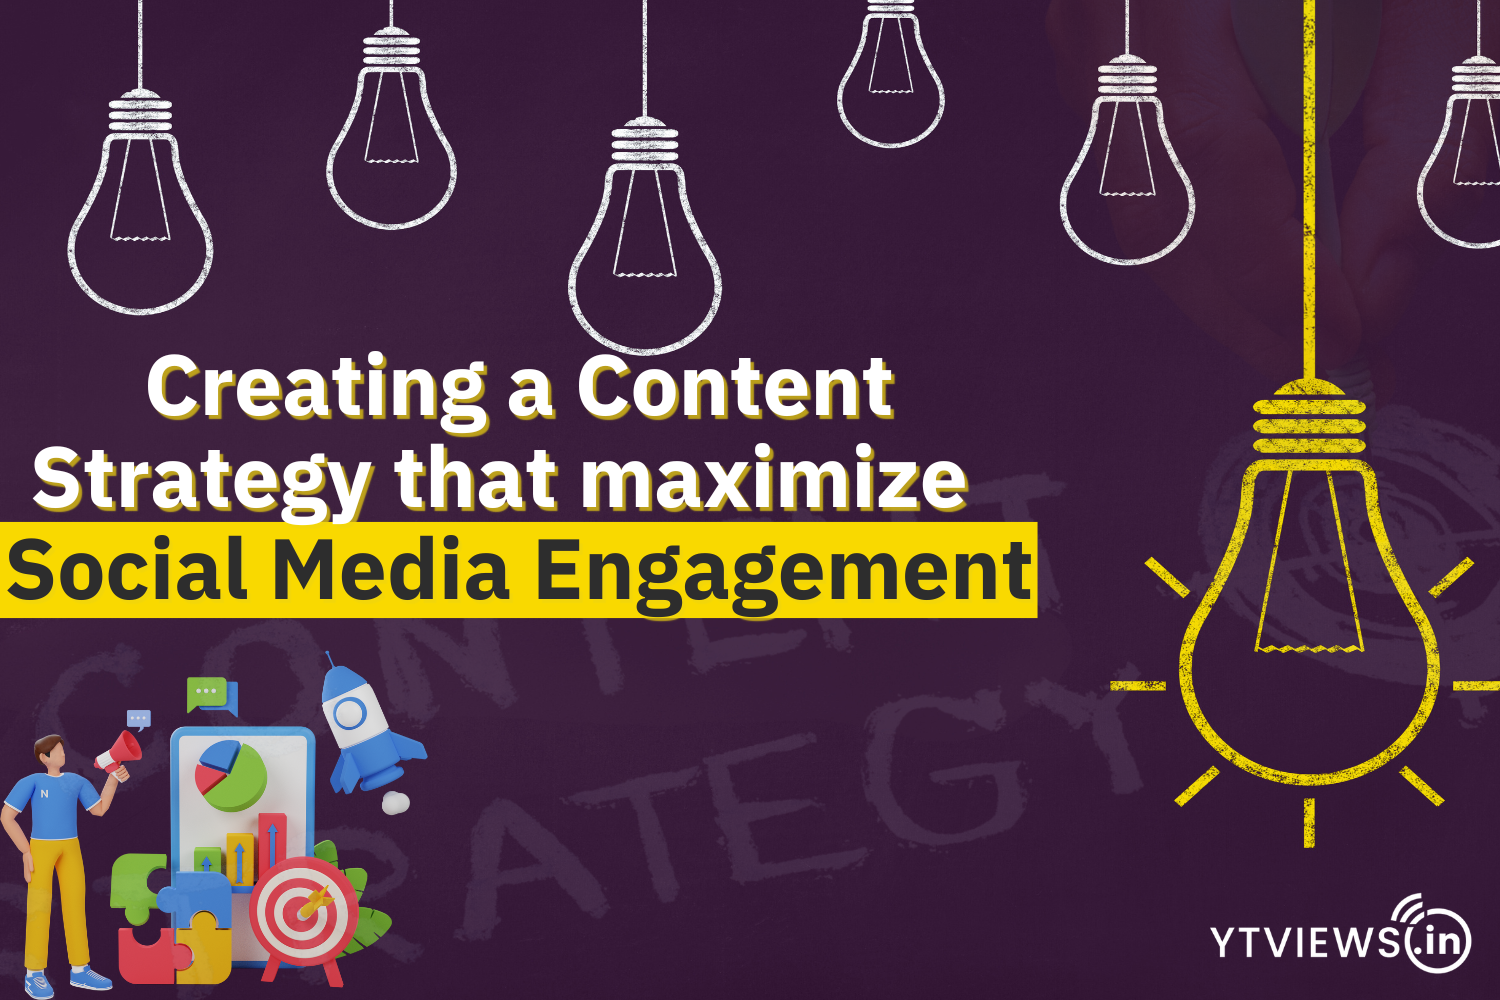 Creating a content strategy that maximizes social media engagement.